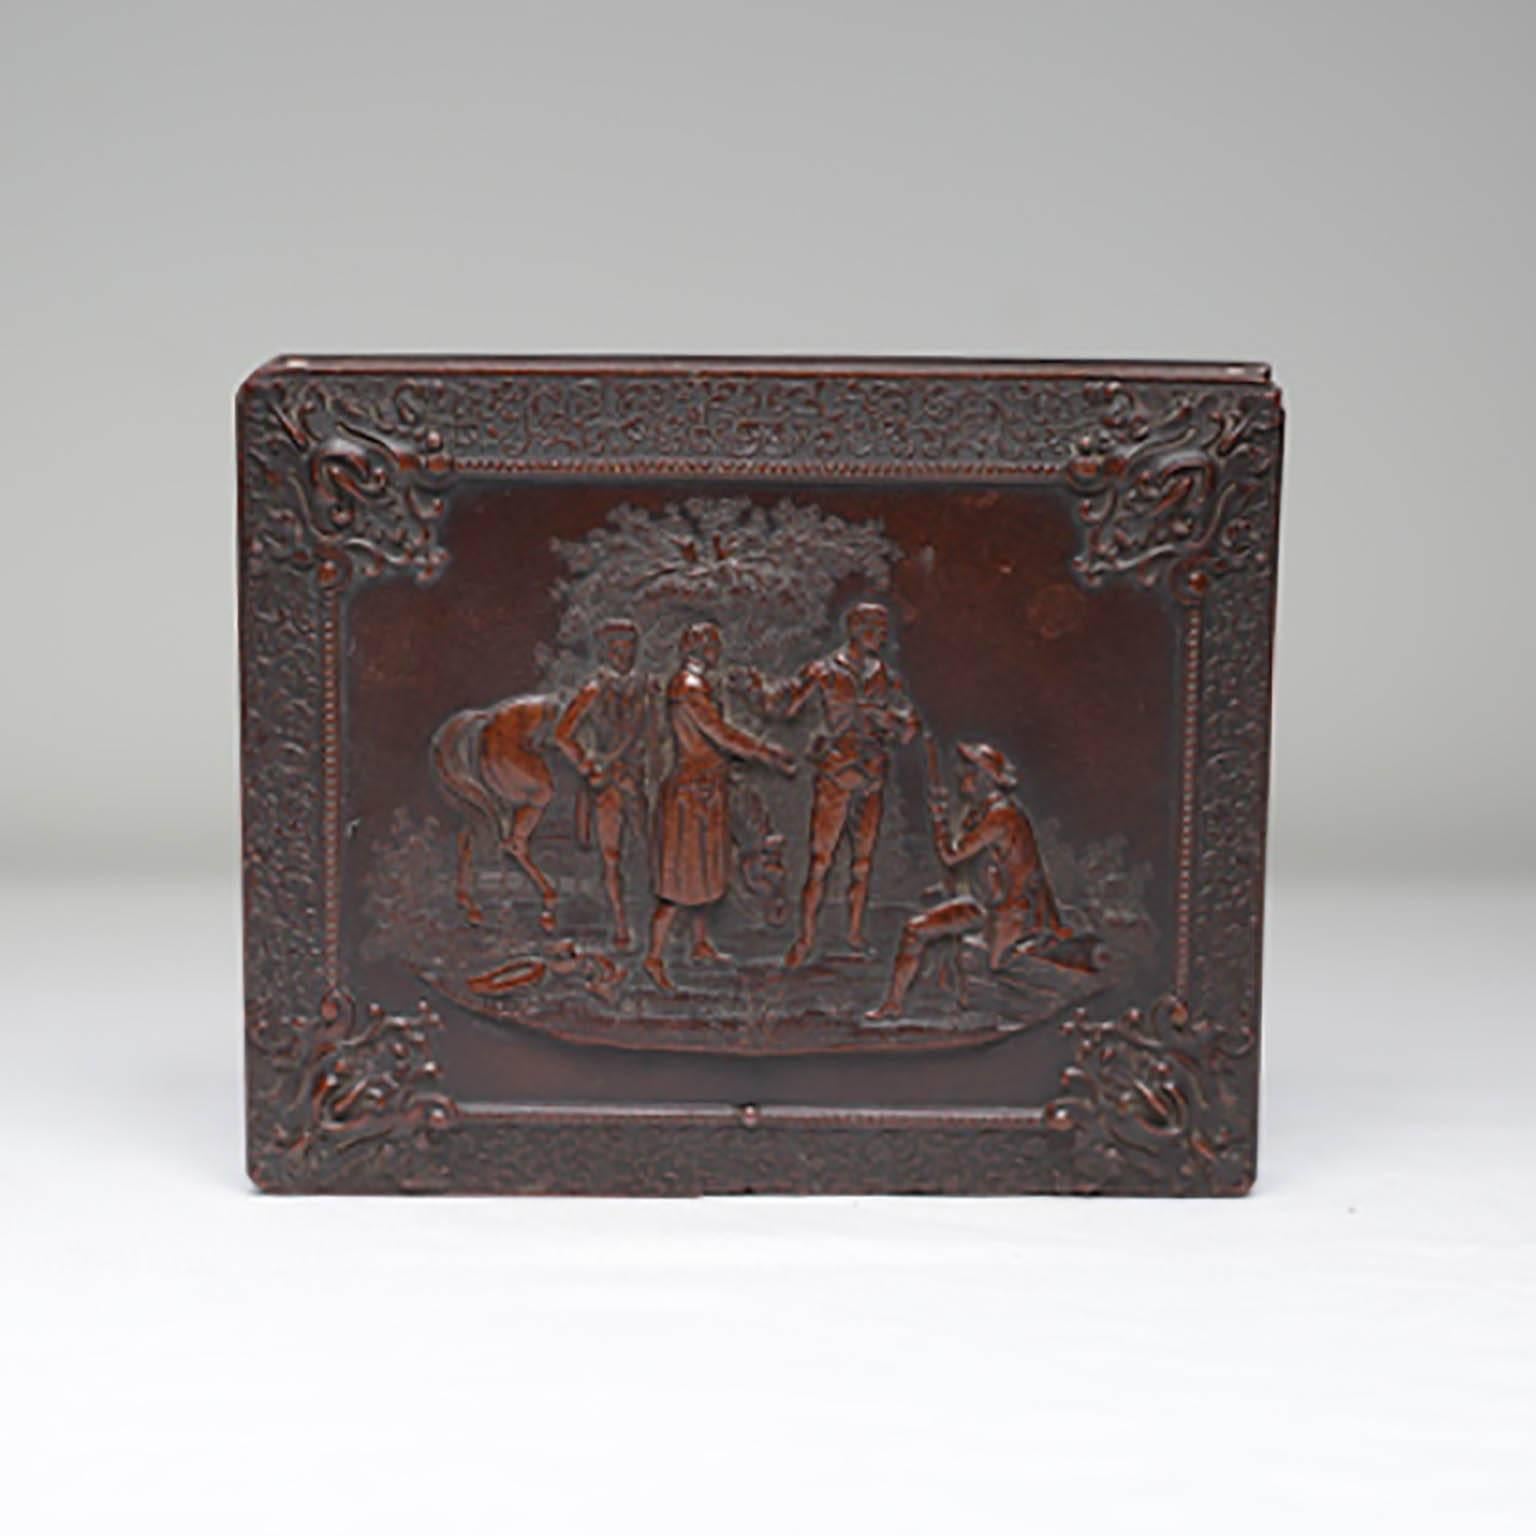 Large daguerreotype in embossed case, circa 1880s. Case is lined with velvet and made of Gutta Percha which is a tough plastic substance from the latex of several Malaysian trees (genera Payena and Palaquium) that resembles rubber but contains more